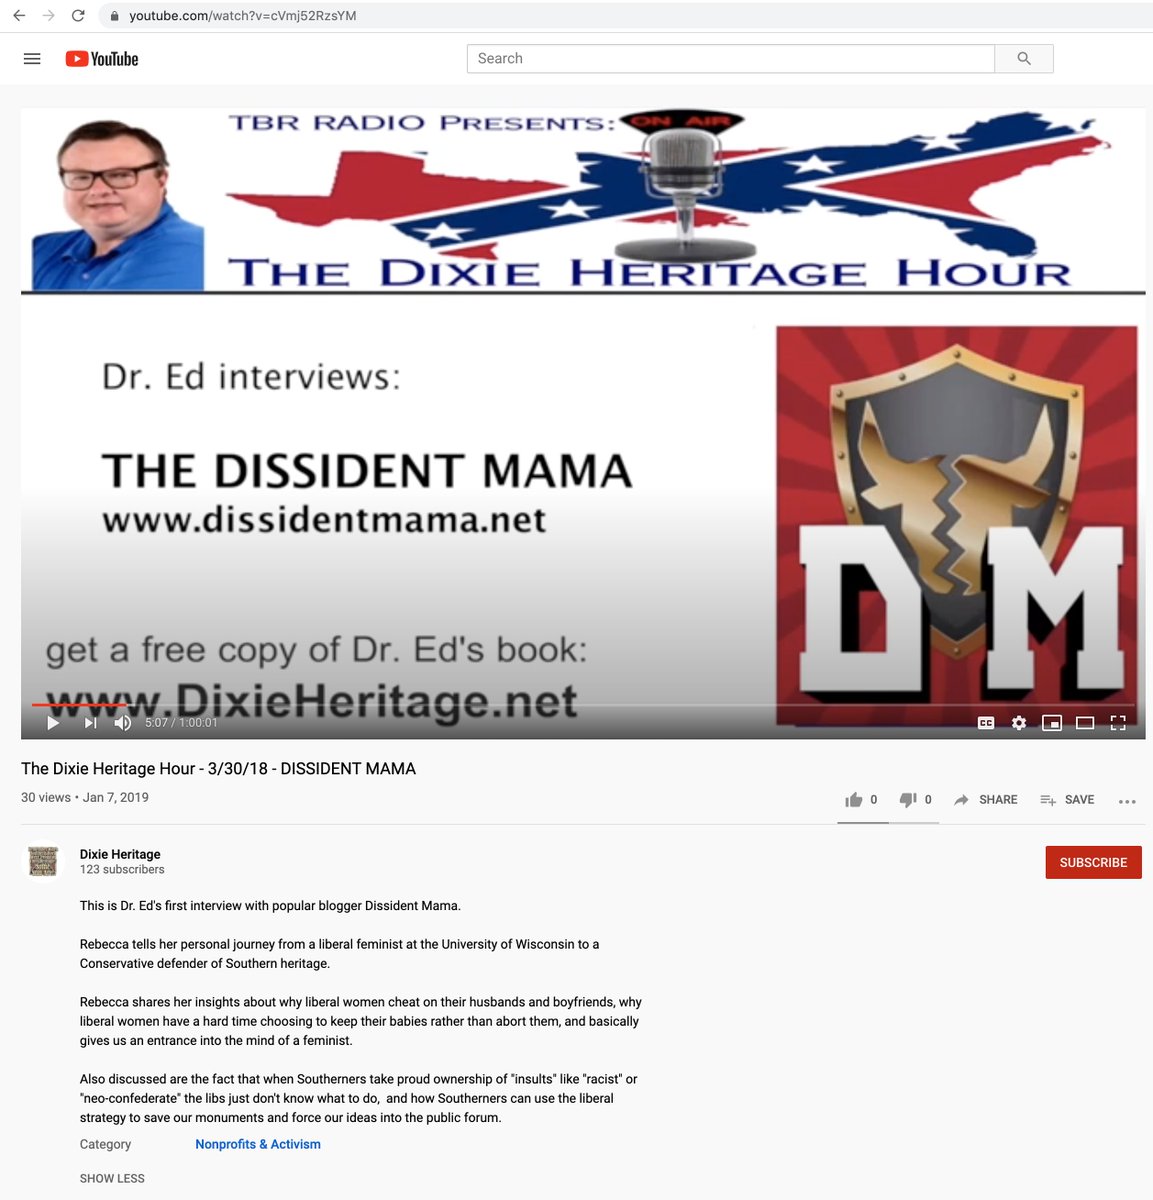 And Rebecca Quate Dillingham has also appeared with lesser-known personalities such as "Dr. Ed" from the neo-Confederate "Dixie Heritage Hour" ...